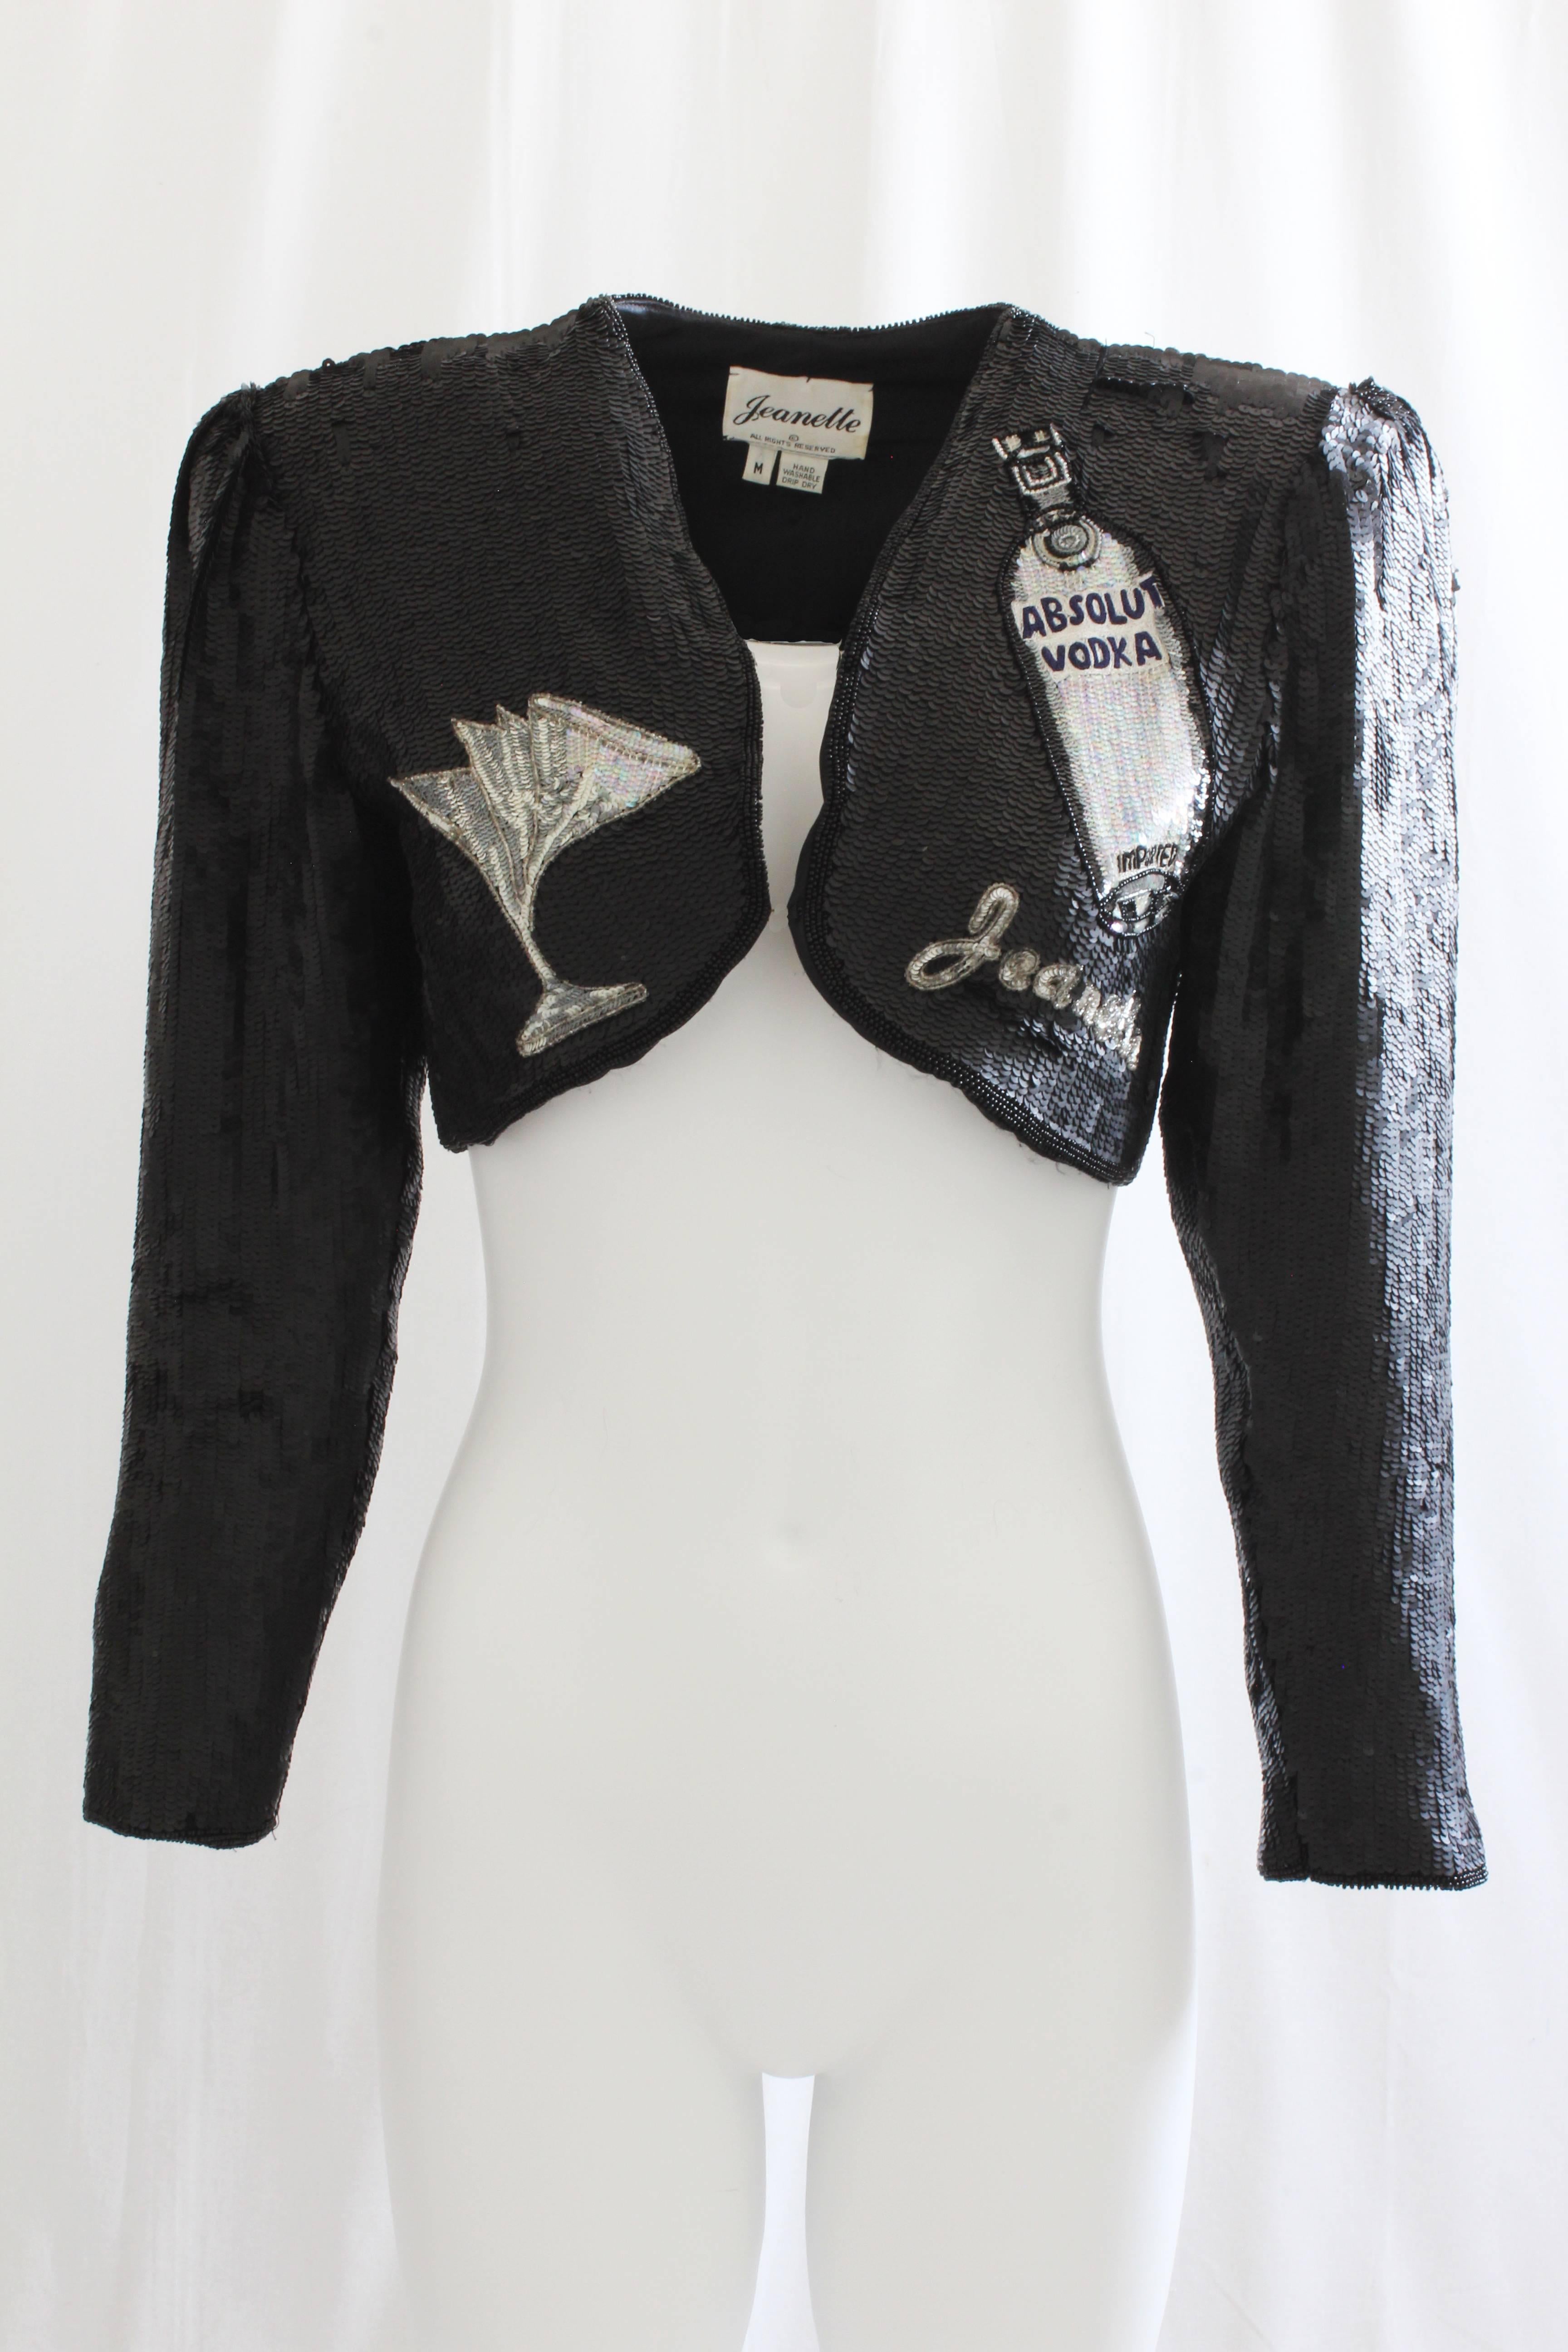 This incredibly rare sequins bolero jacket was designed by Jeanette Kastenberg in 1991 for the Absolut Vodka ad campaign that year.  Covered in tons of sequins, it features the iconic Absolut bottle with cocktail glasses! No fasteners, it is meant